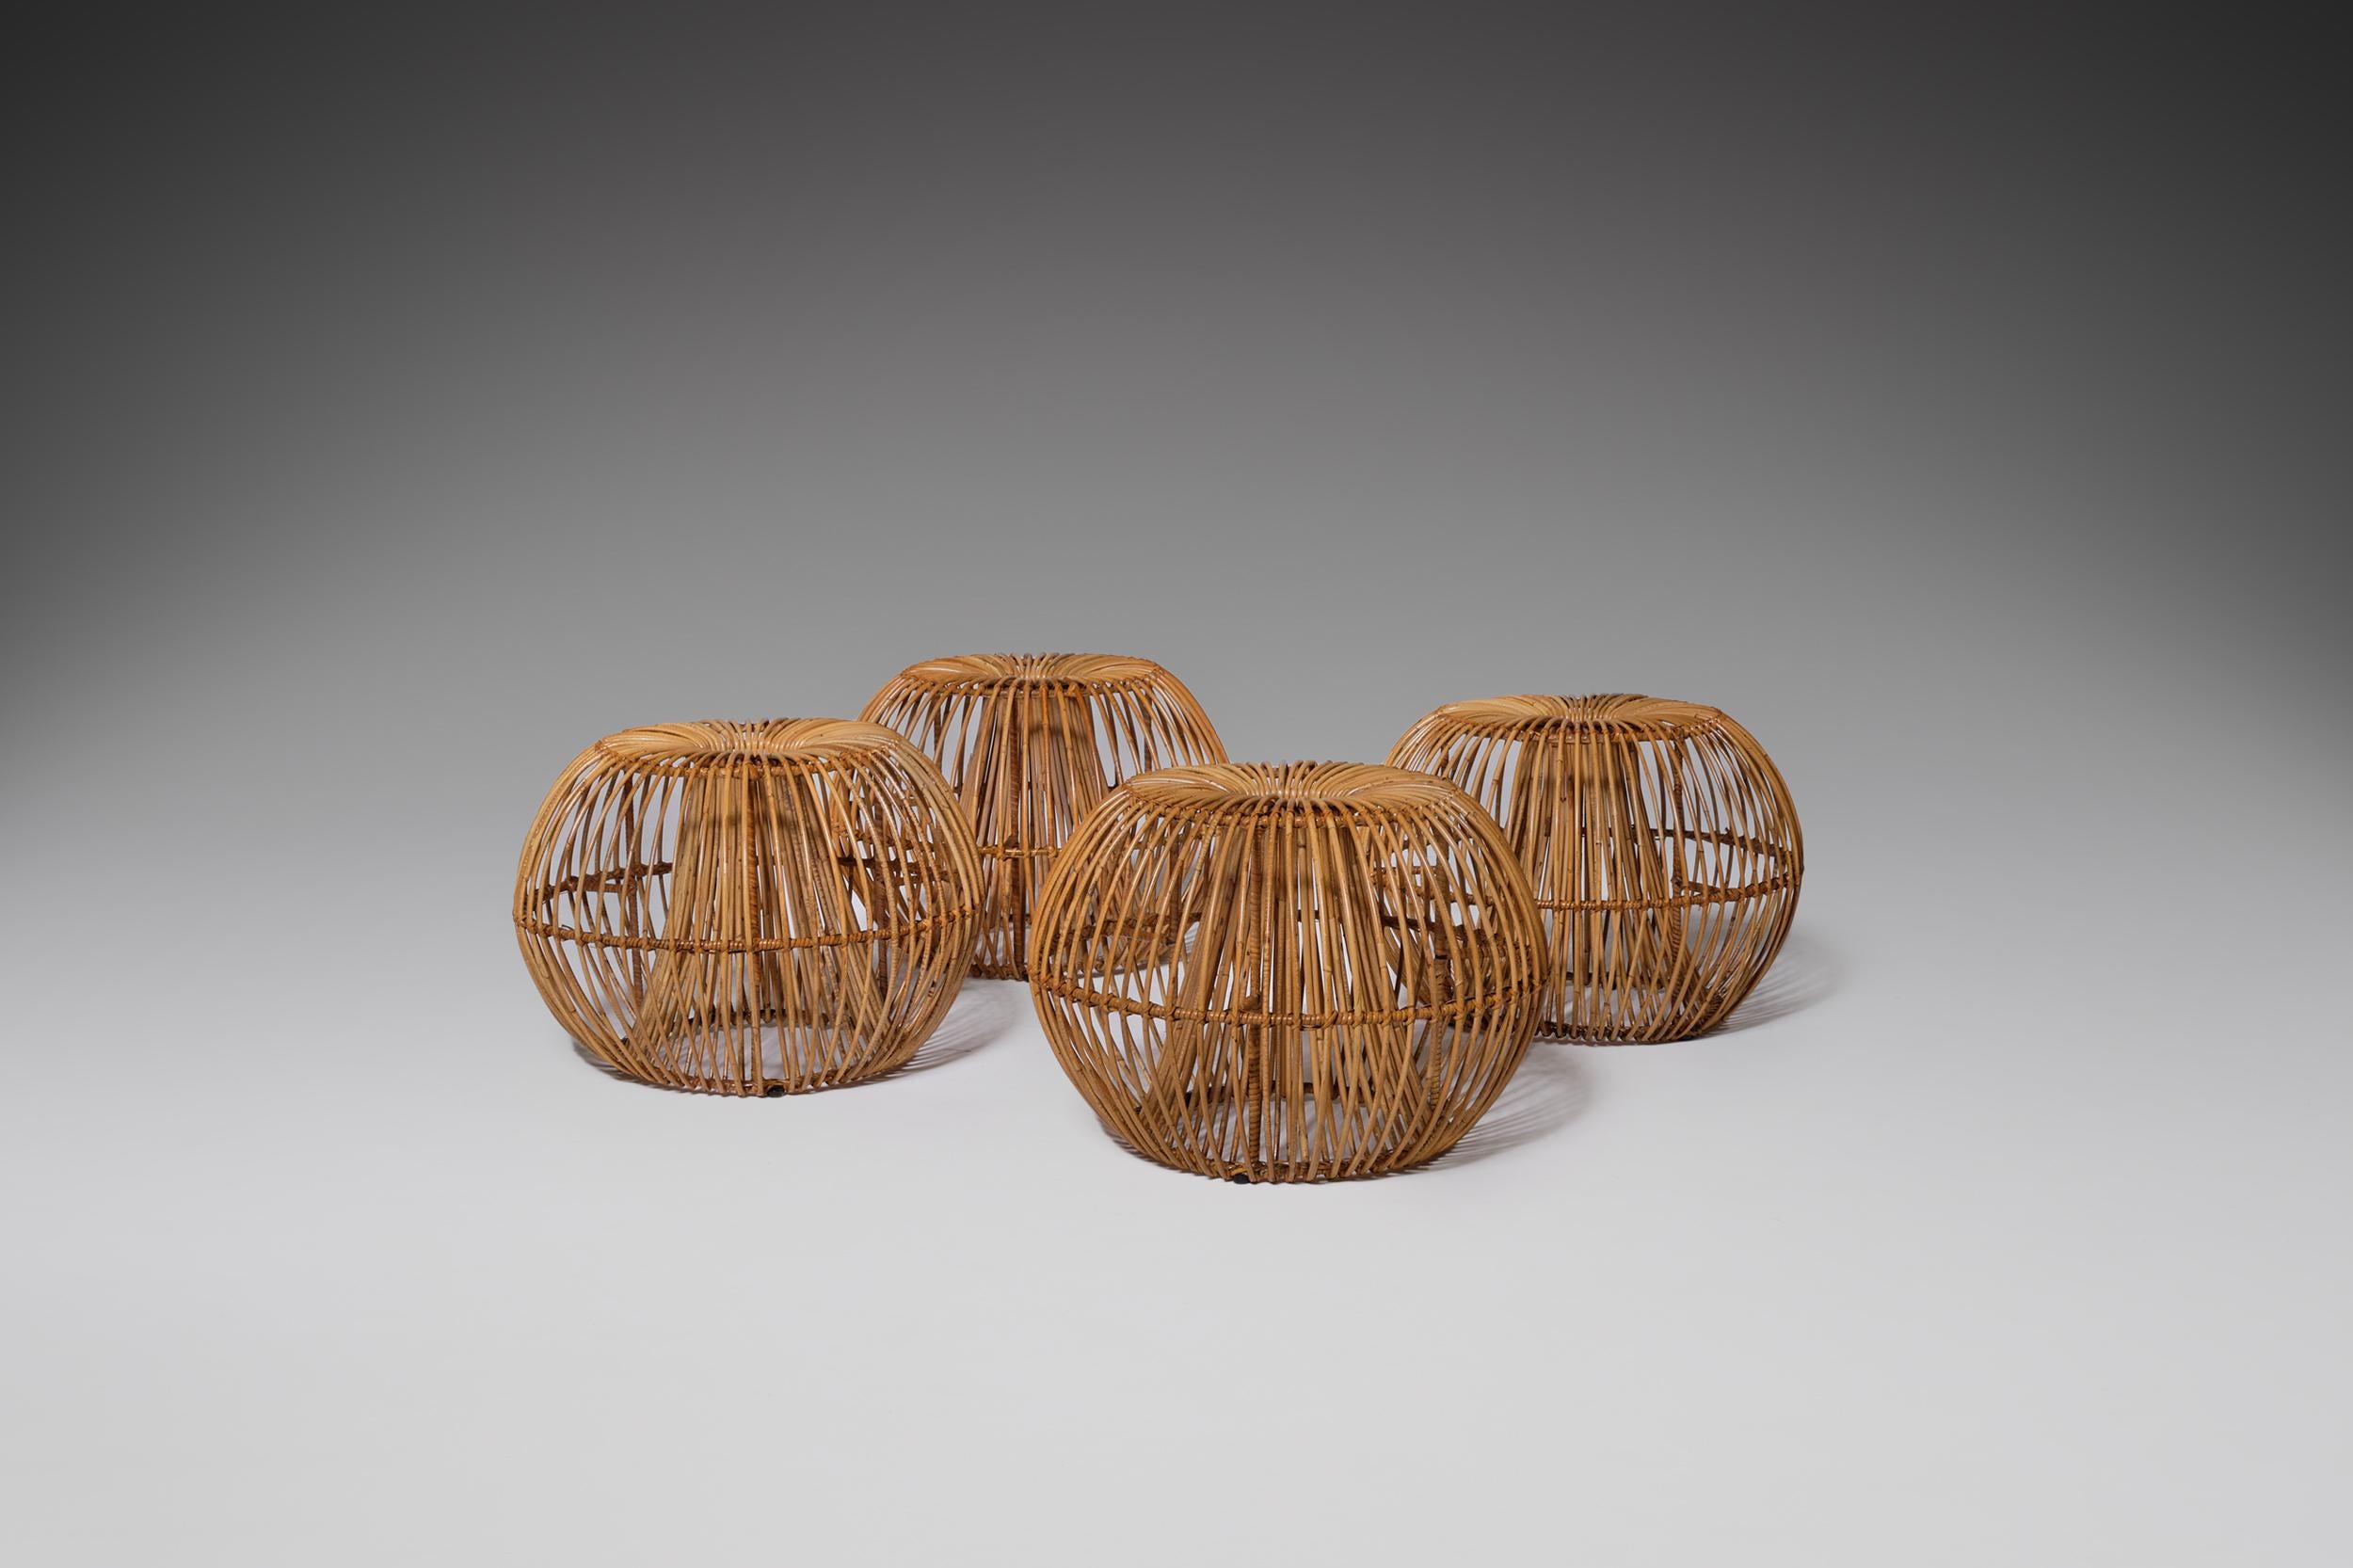 Exceptional set of rattan stools by Janine Abraham and Dirk Jan Rol for Rougier, France, circa 1955. Fantastic Mid-Century Modern basket shaped stools / ottomans made of rattan and a metal frame inside to provide it's strength. High quality